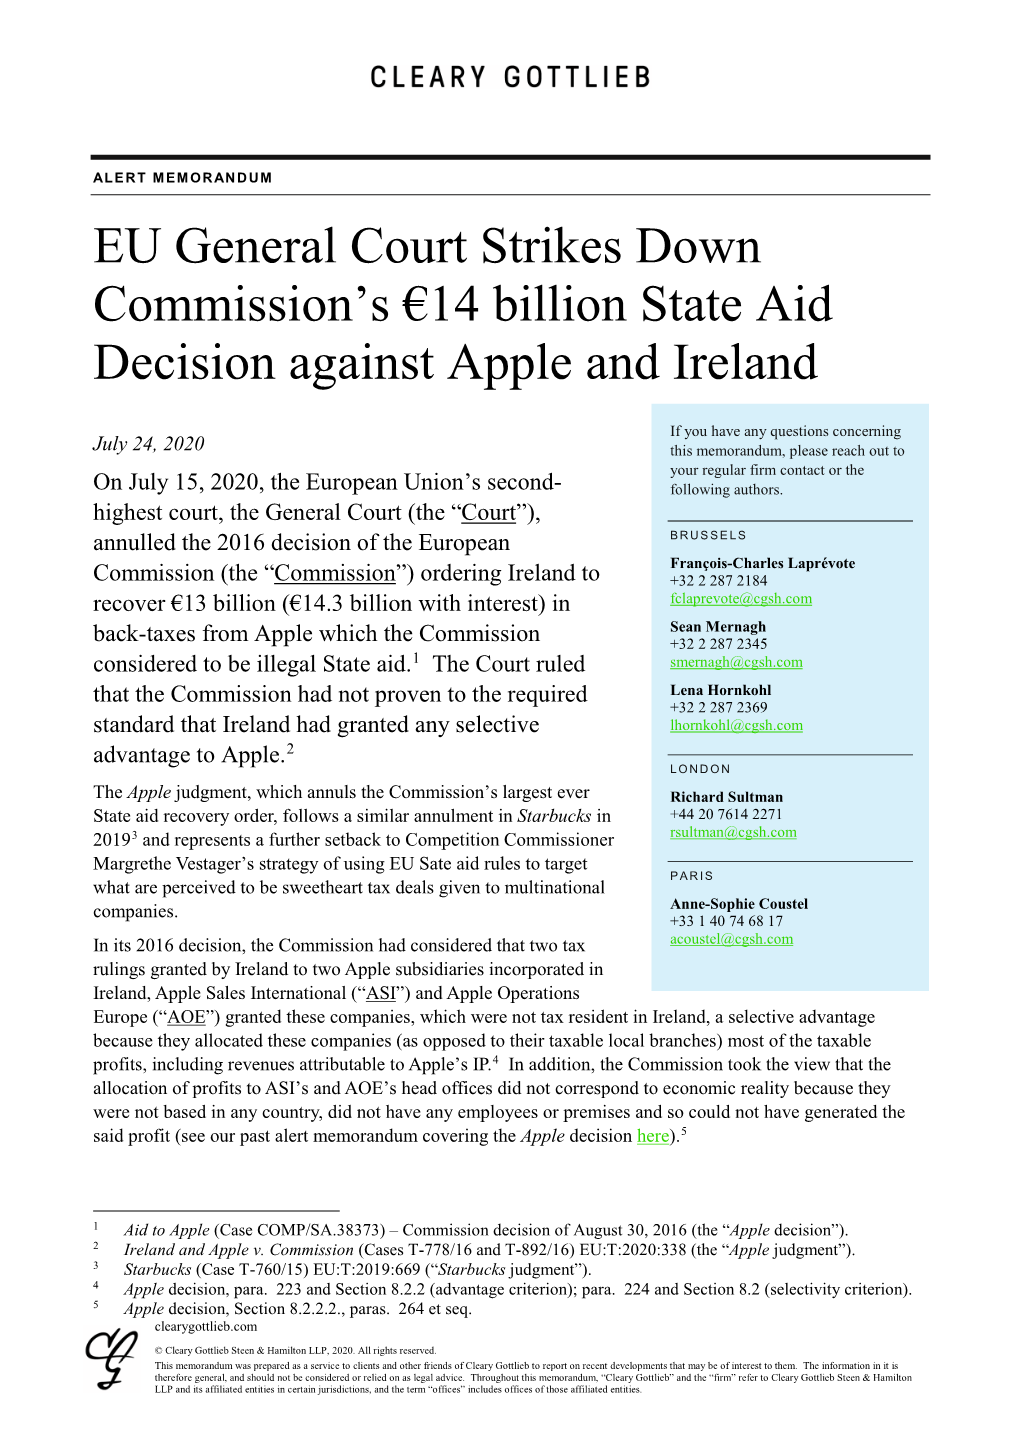 EU General Court Strikes Down Commission's €14 Billion State Aid Decision Against Apple and Ireland